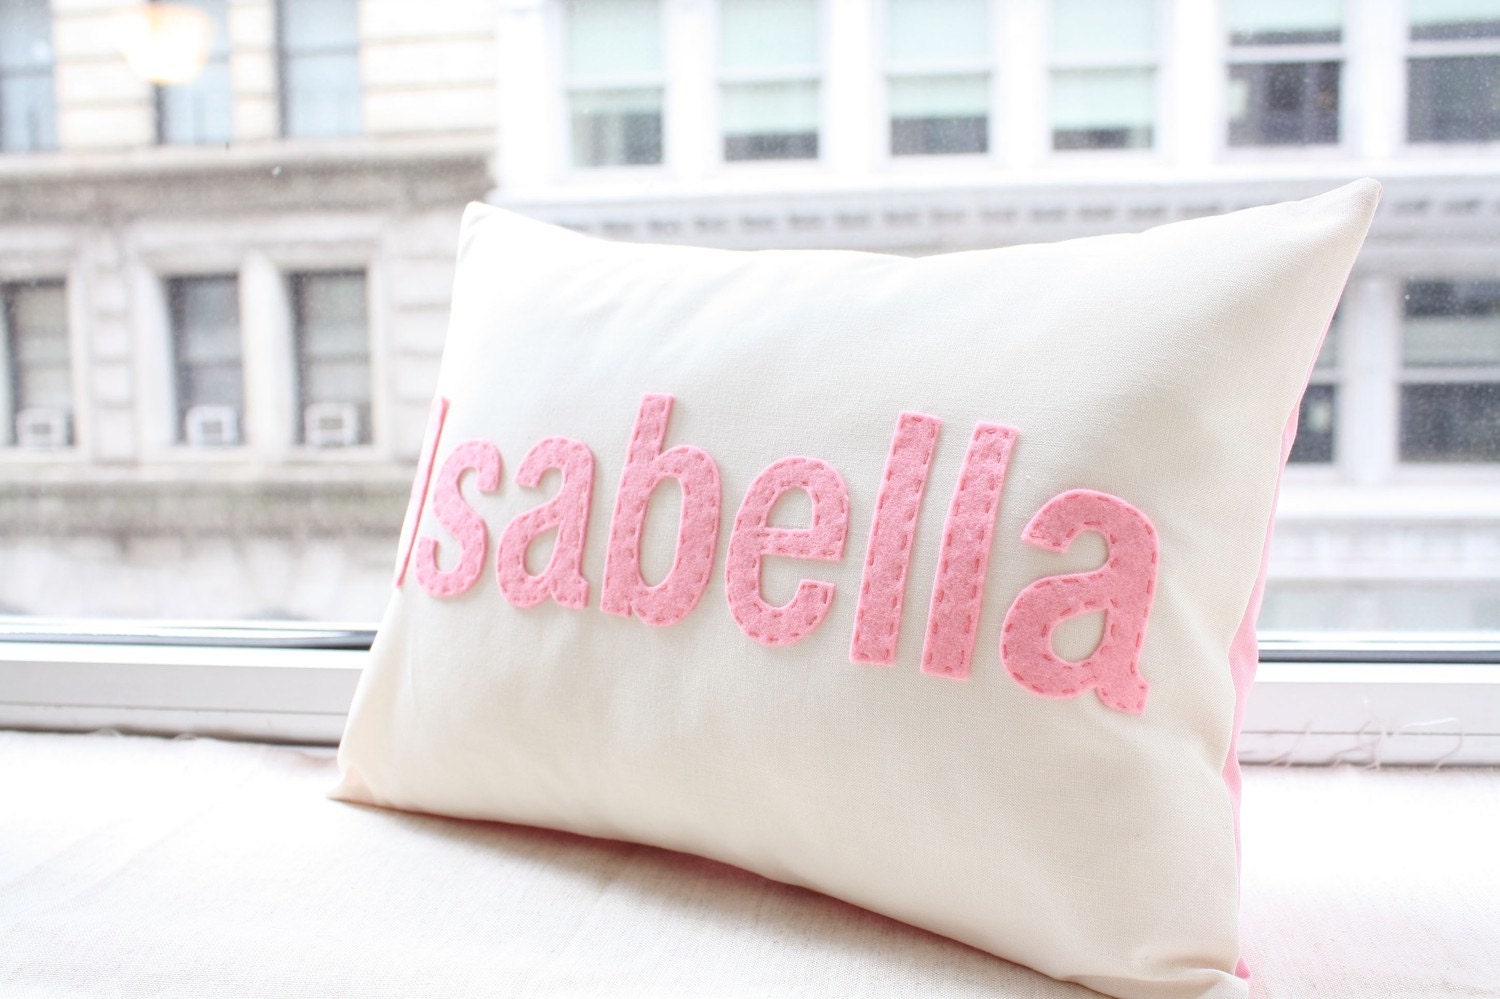 Custom Personalized Pillow